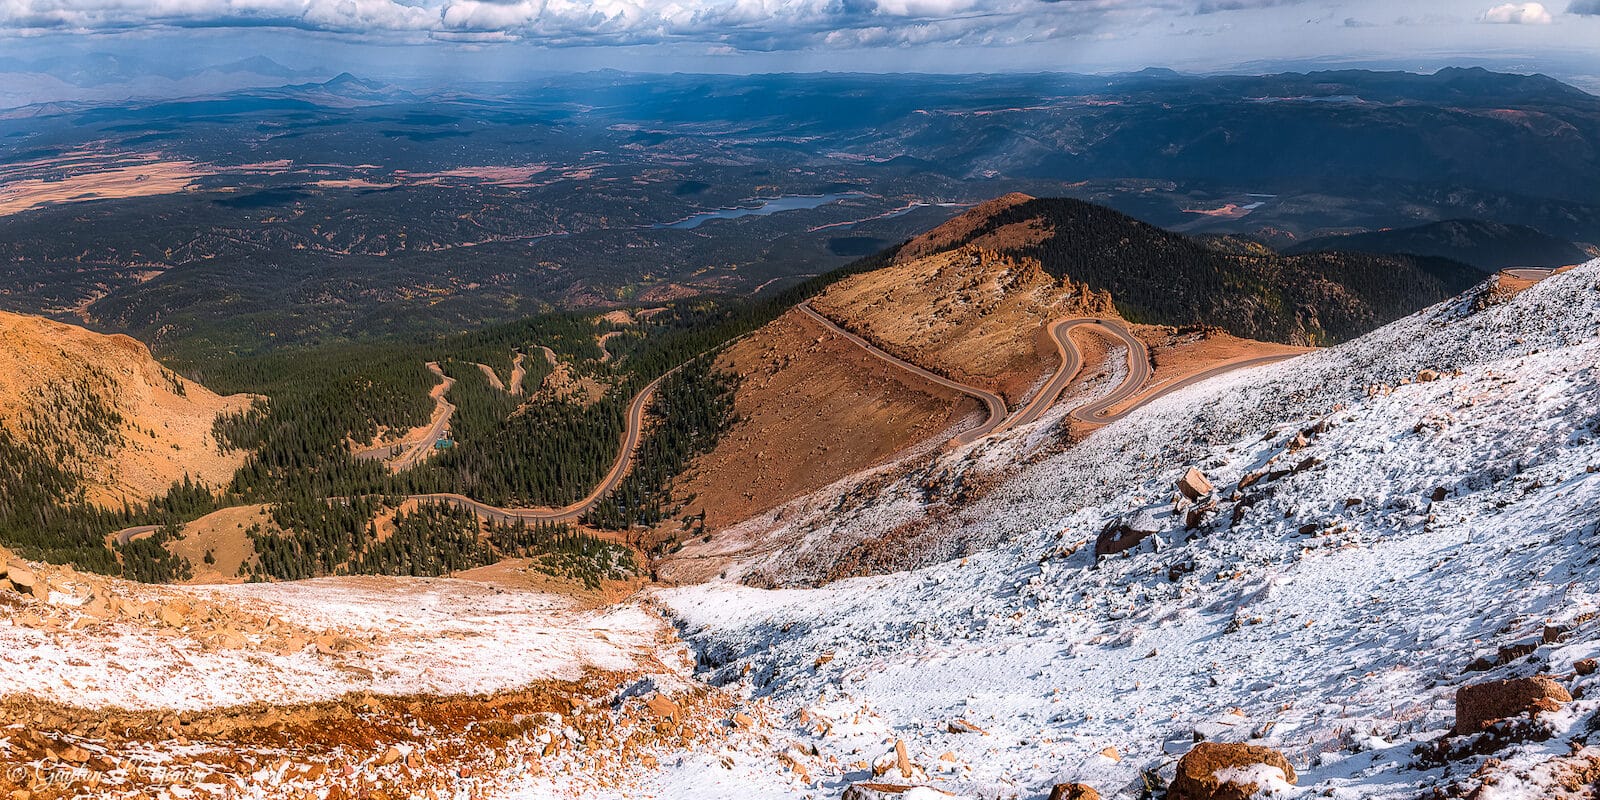 Overlooking snow on Pikes Peak with view of highway switchbacks in distance